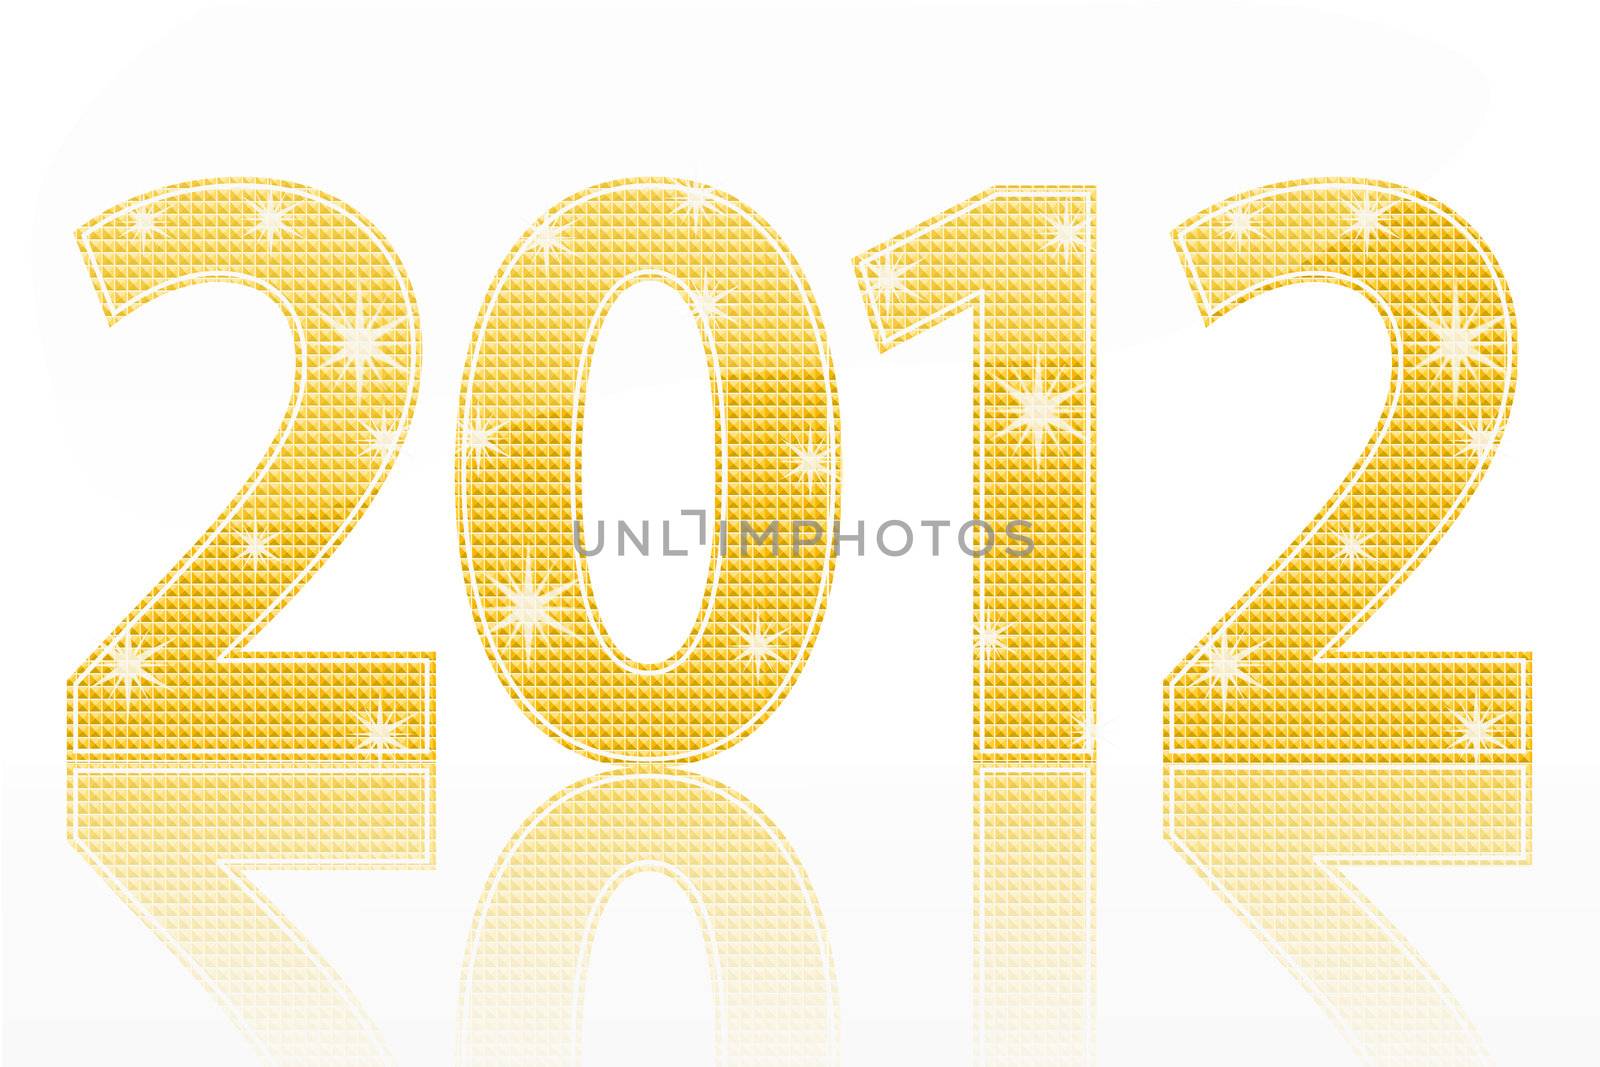 The Year 2012 by Bestpictures